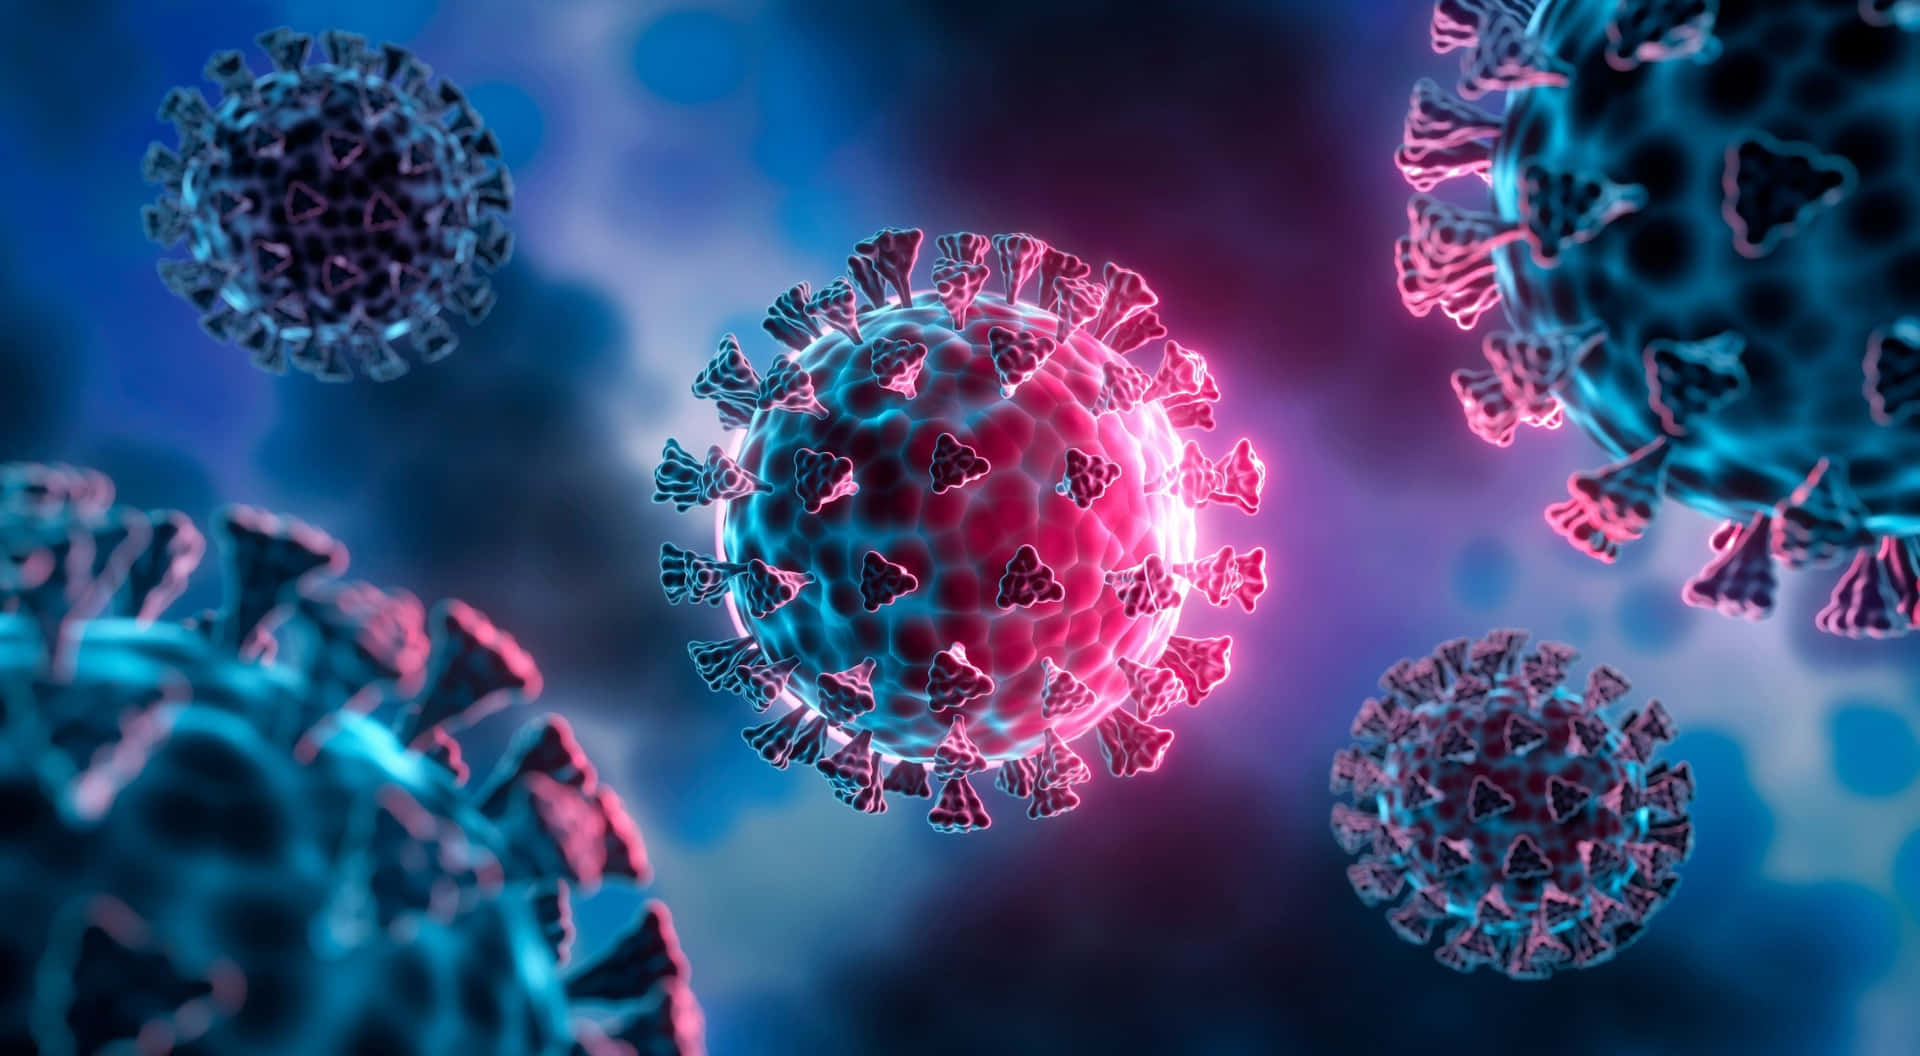 Coronaviruses In A Blue And Pink Background